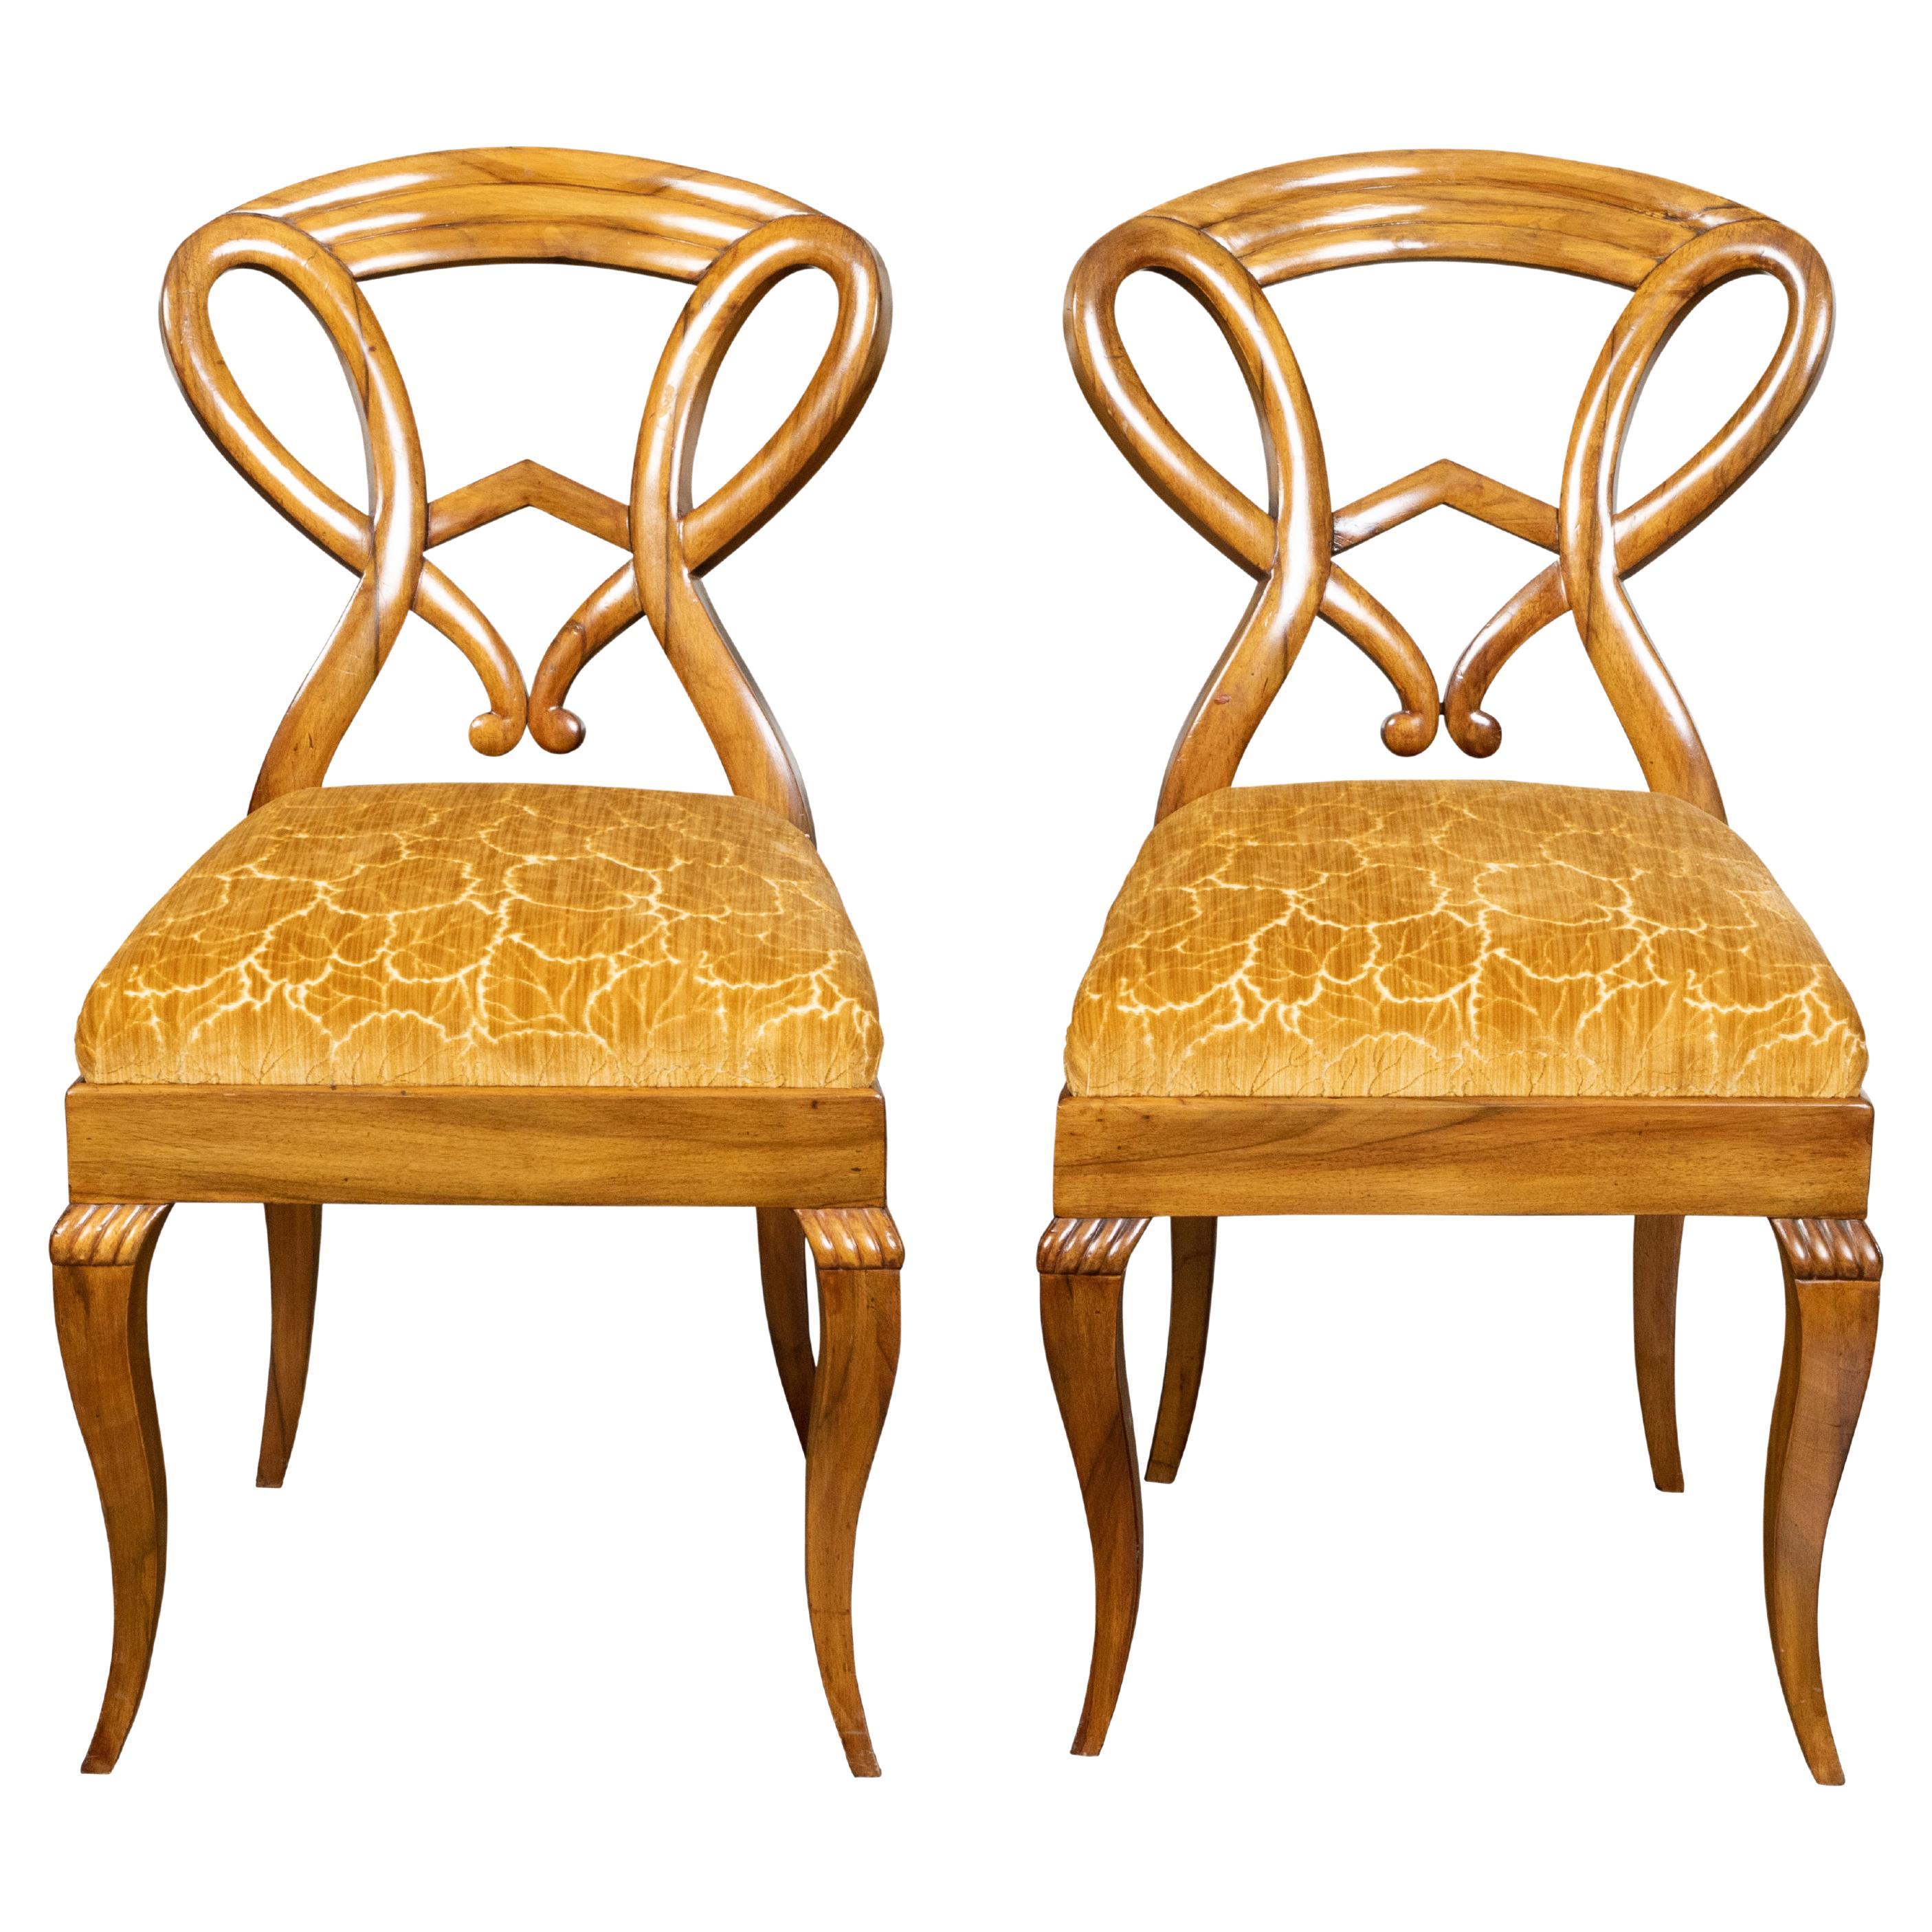 Pair of Austrian Biedermeier 19th Century Side Chairs with Carved Open Backs